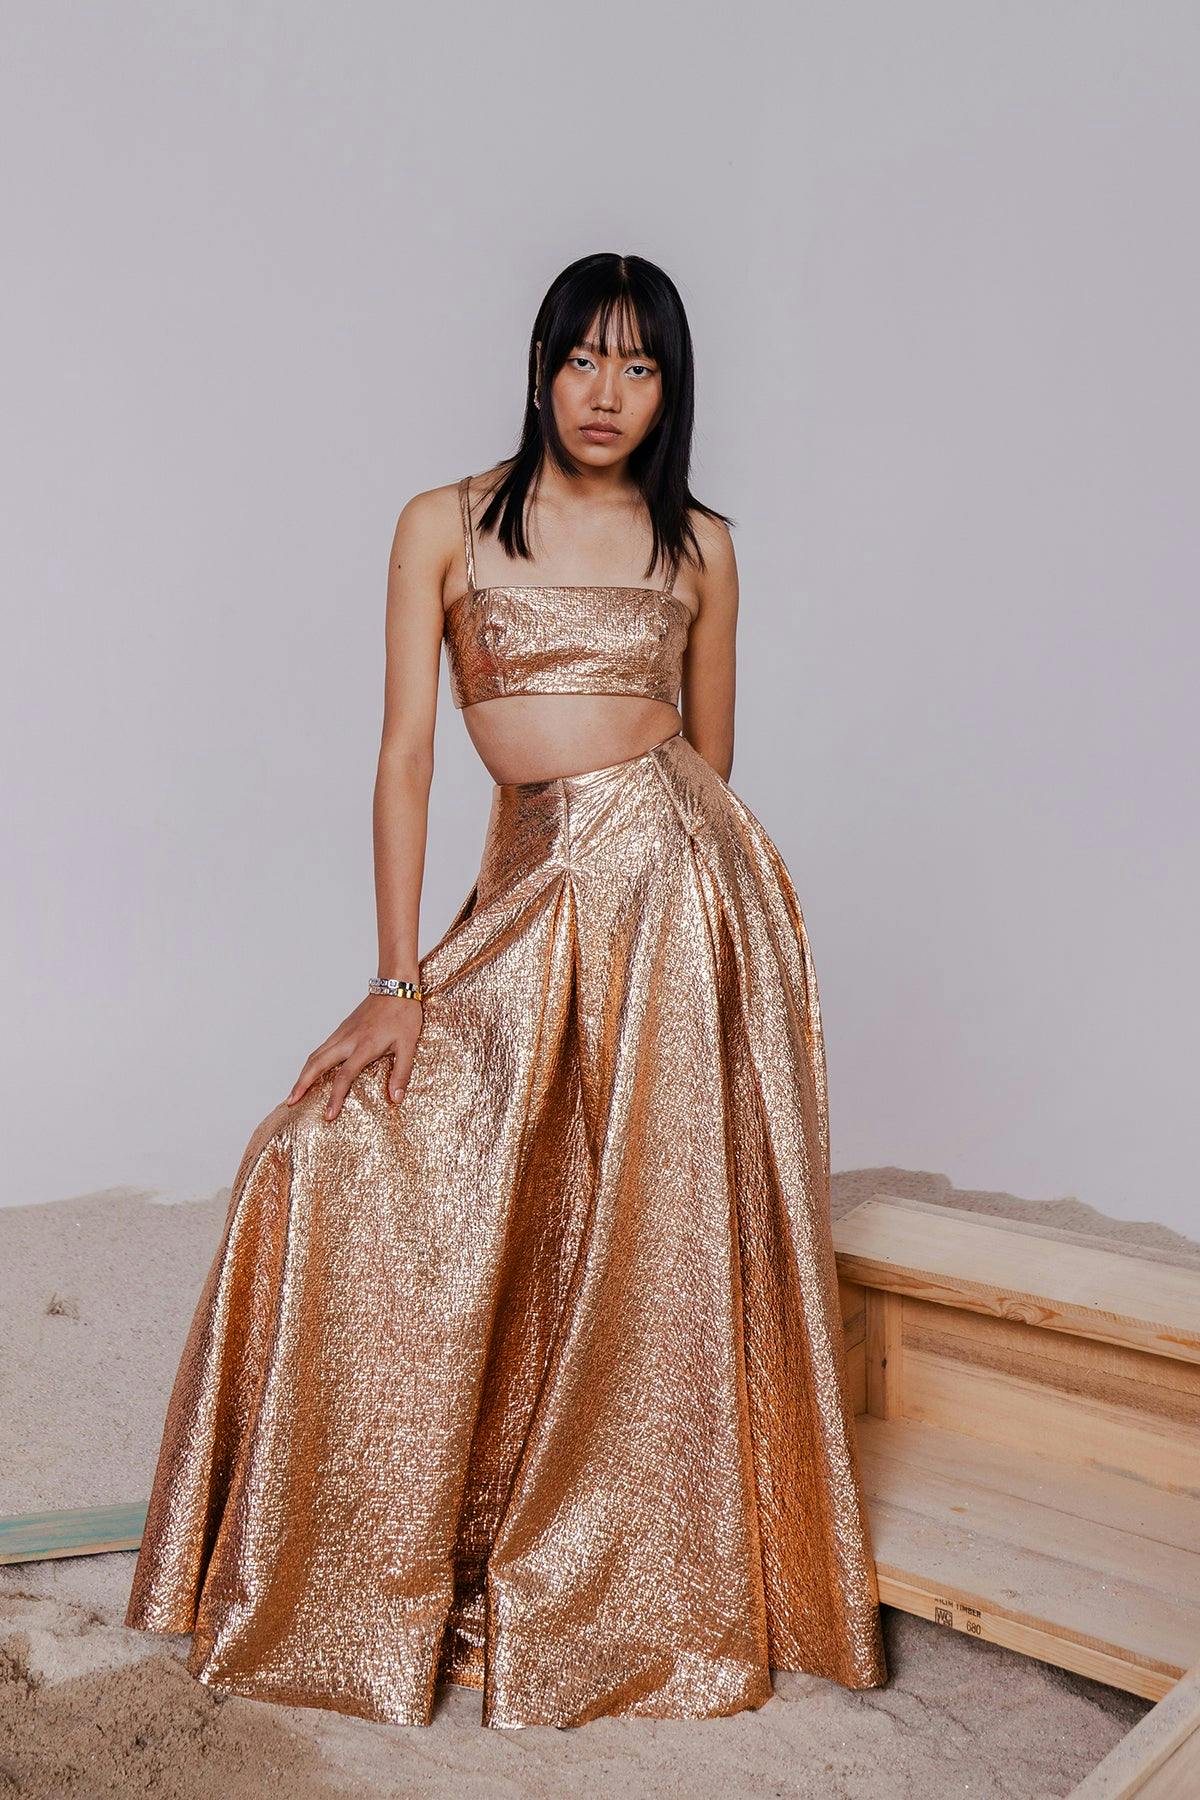 CHIARA BRONZE METALLIC BRALETTE & LONG SKIRT, a product by July Issue